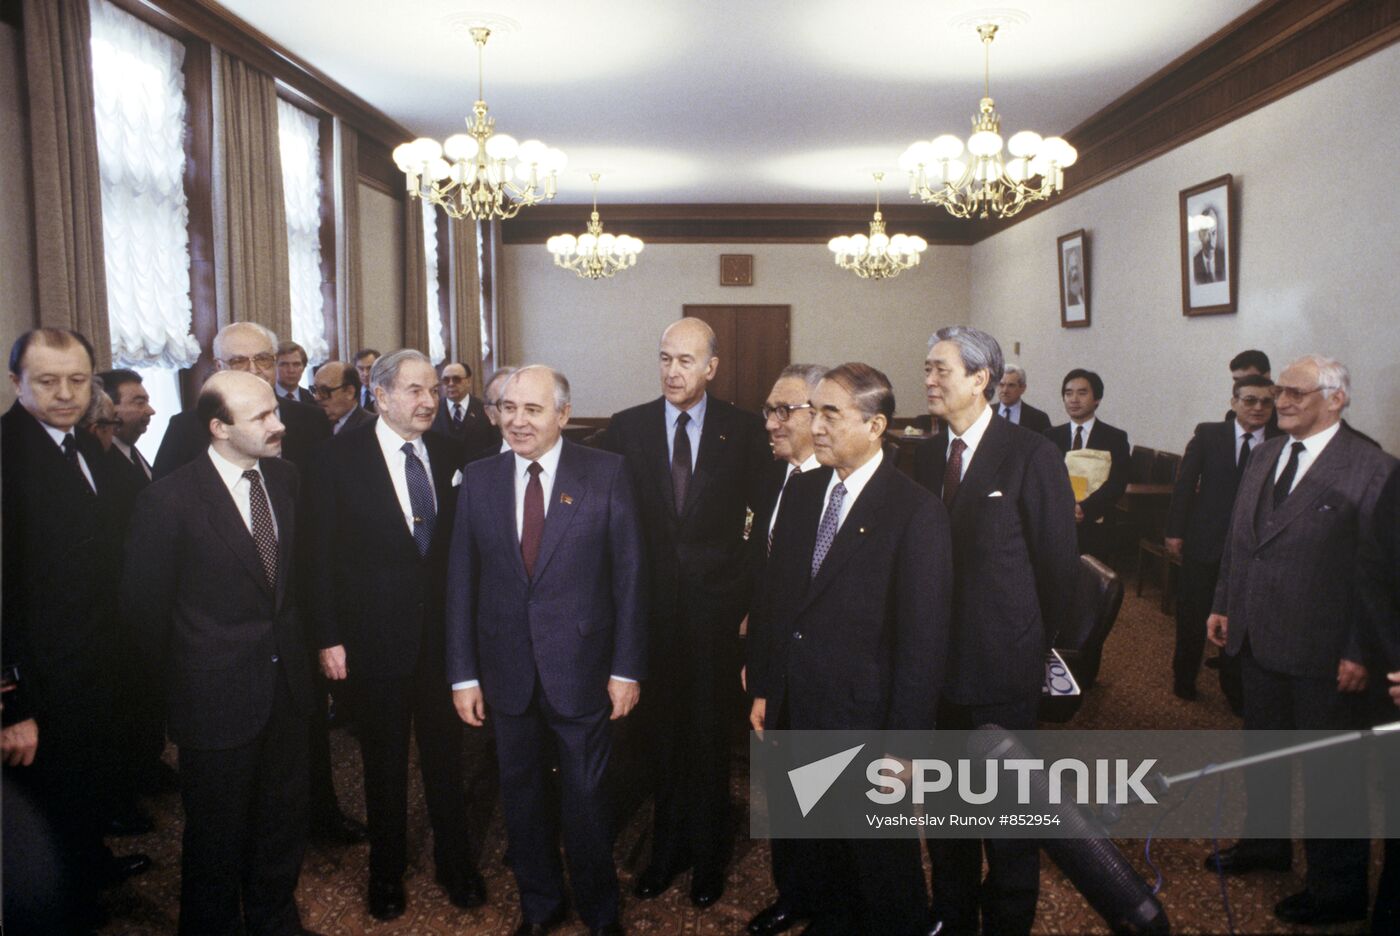 Mikhail Gorbachev and members of the Trilateral Commission